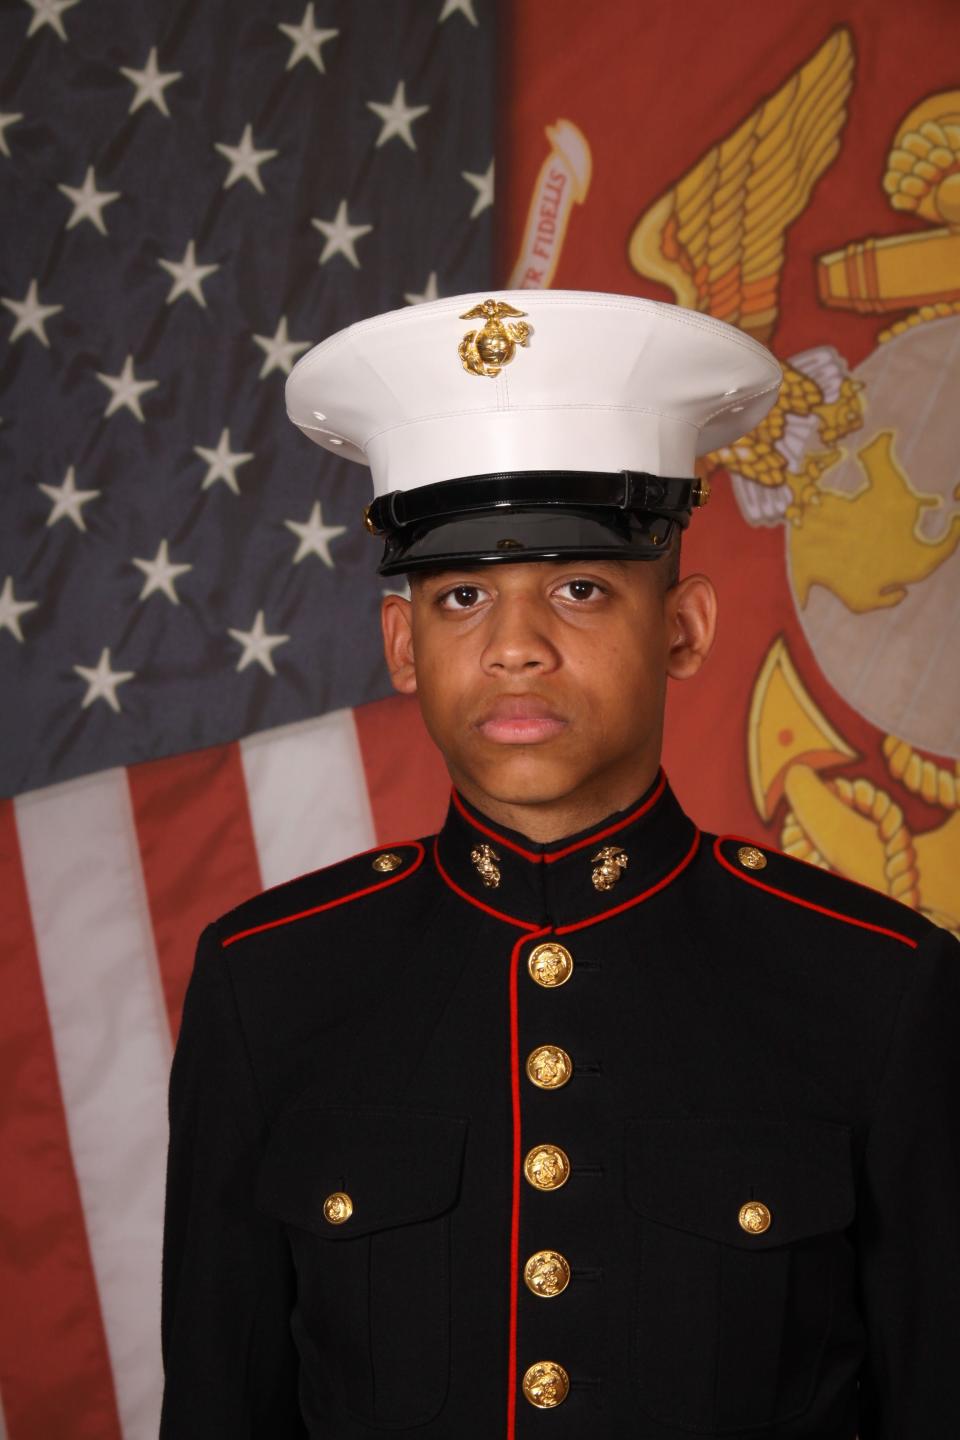 Ivan R. Garcia, 23, from Naples, Fla., was one of three U.S. Marines found dead in a vehicle in North Carolina.